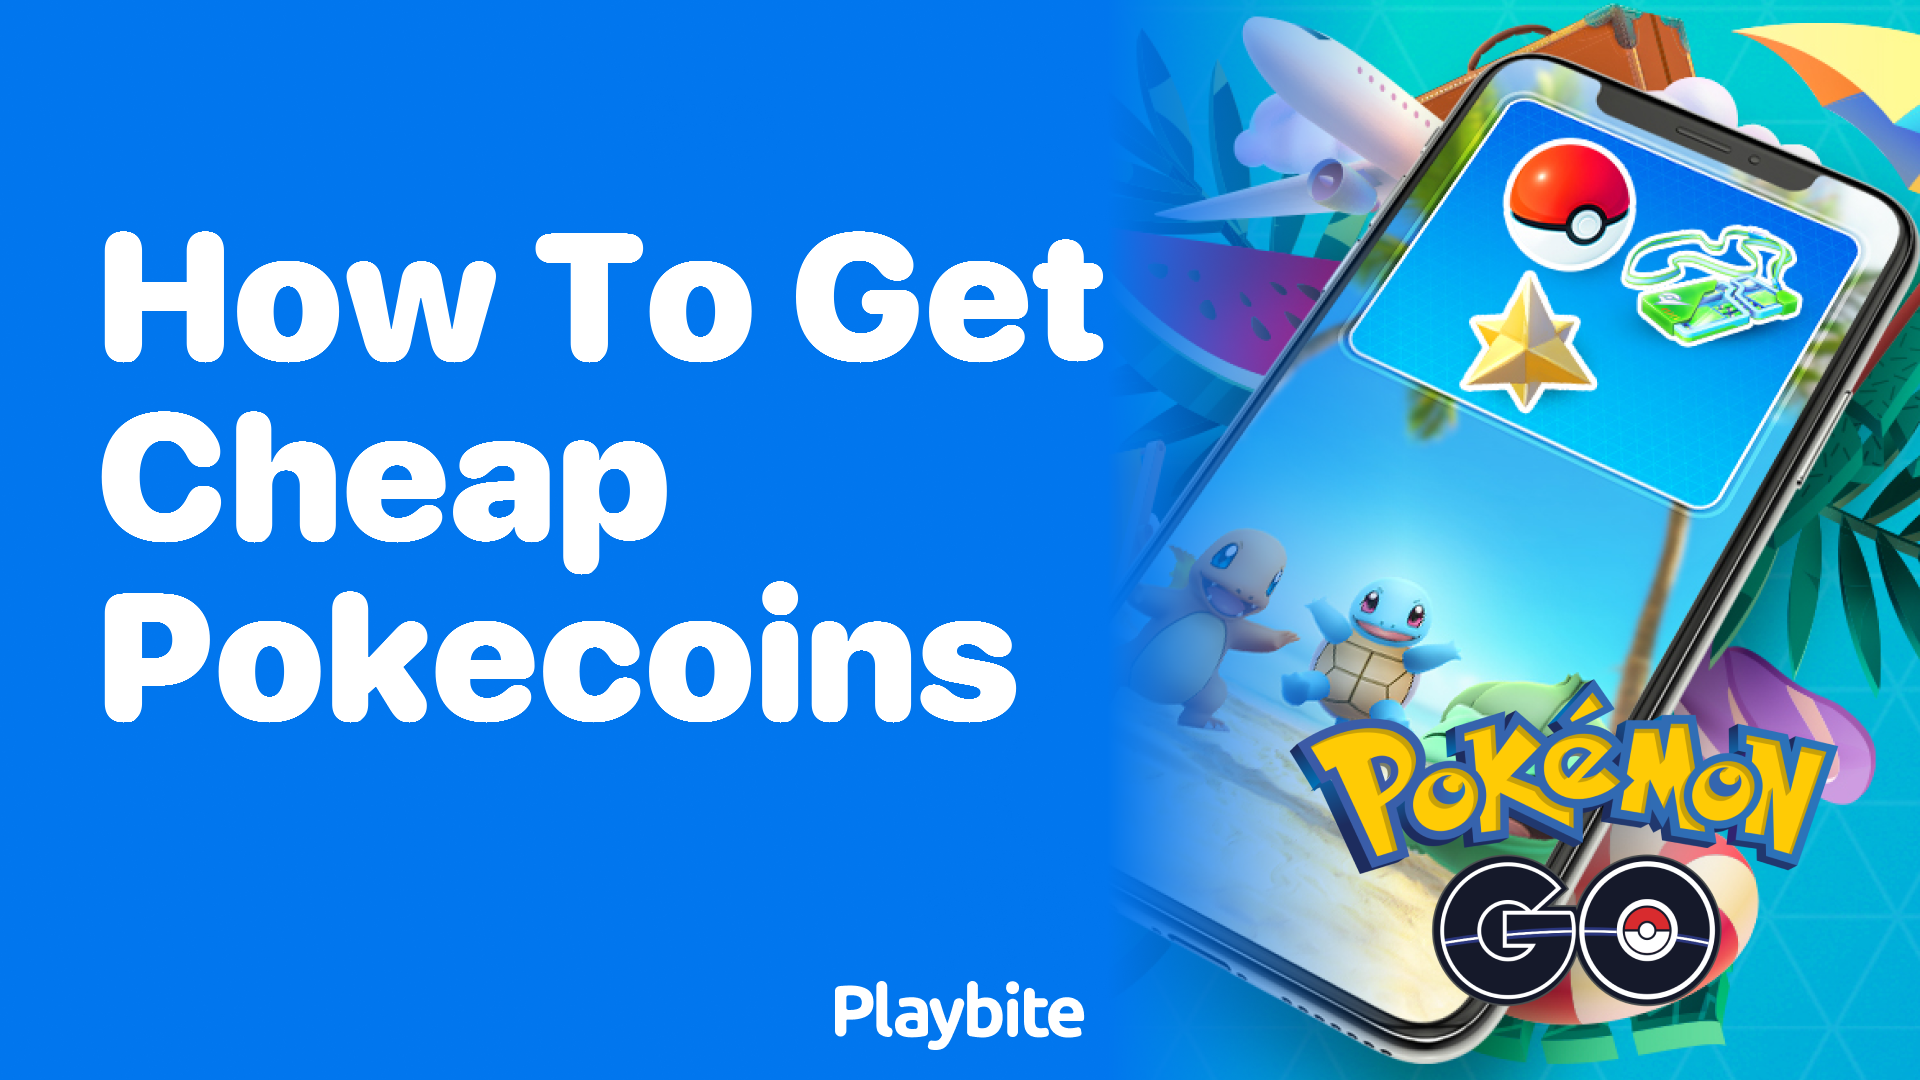 How to Get Cheap PokeCoins: A Fun Guide